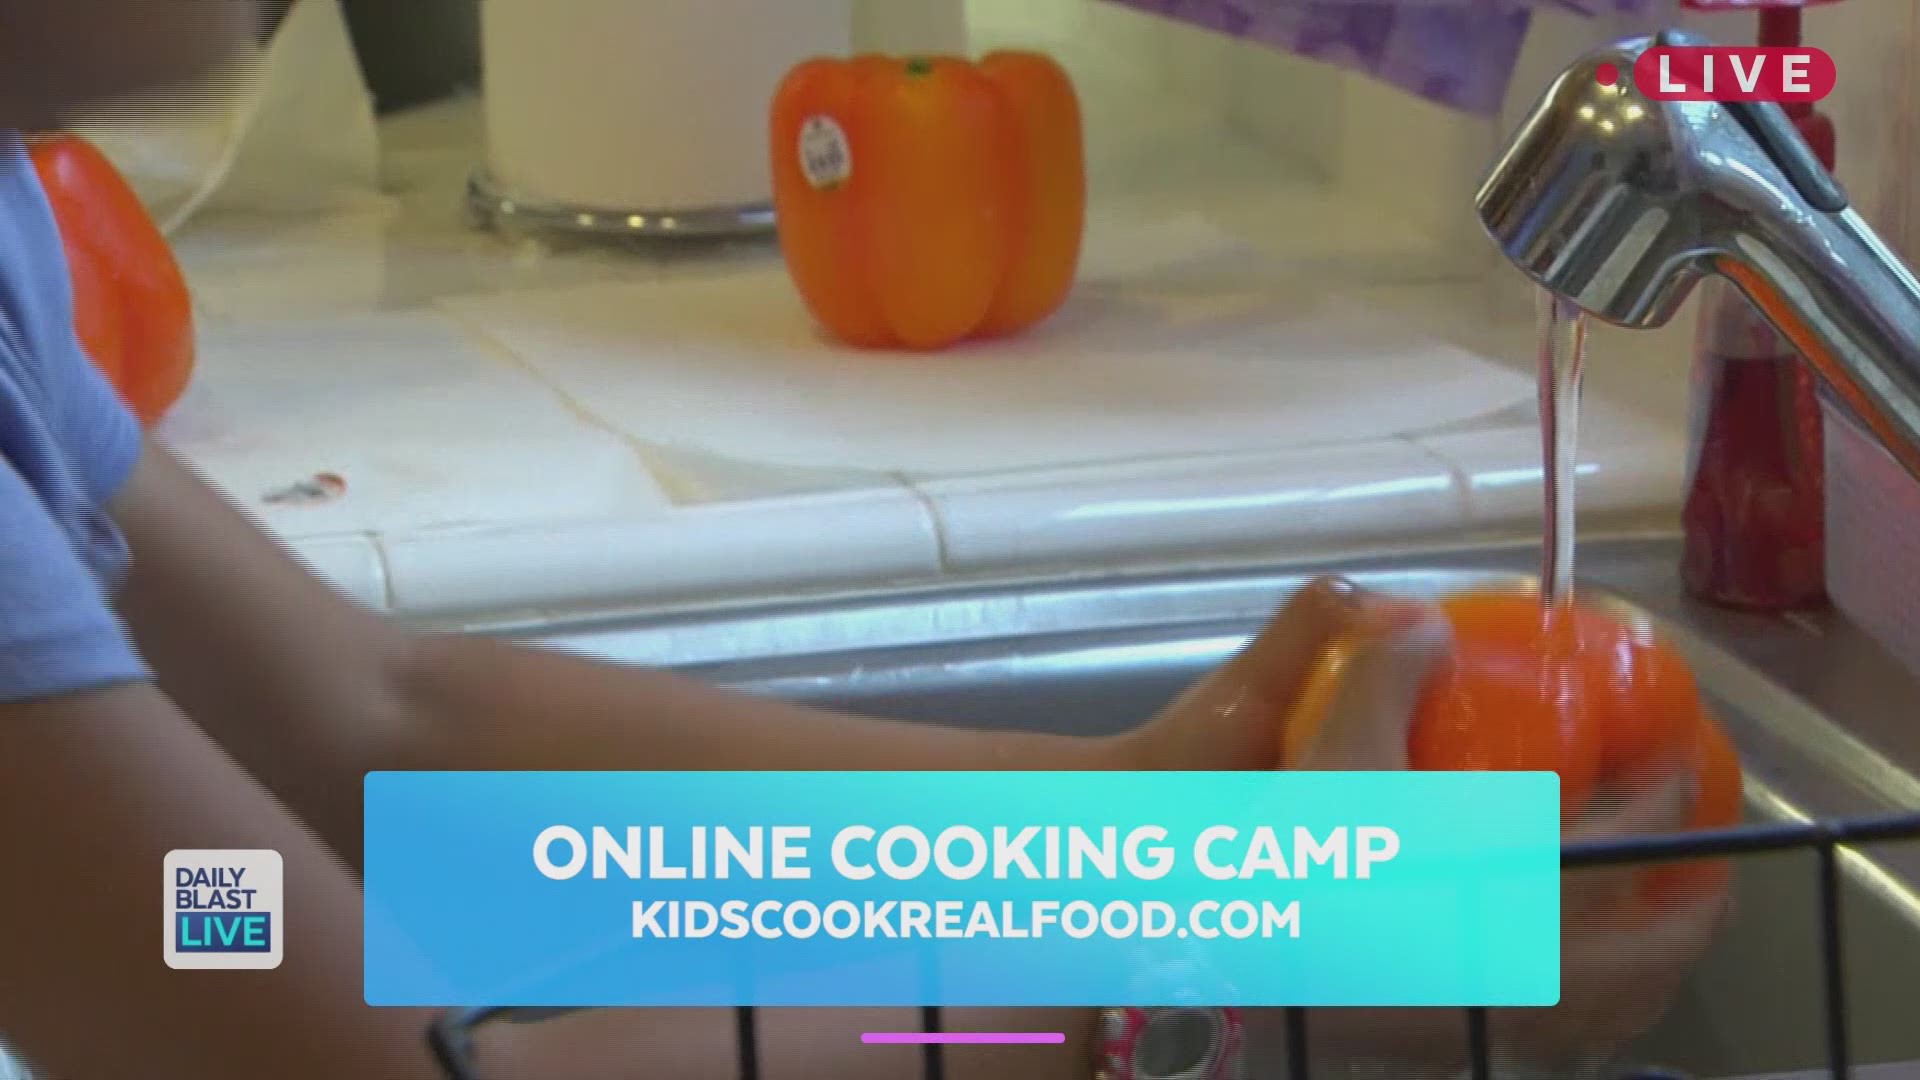 School may be out for summer, but Daily Blast LIVE has all the 'cool' activities to keep kids busy in the hot weather. From an online cooking camp you can do with the entire family to thrill coaster tours, DBL is revealing all the best ways to keep kids e